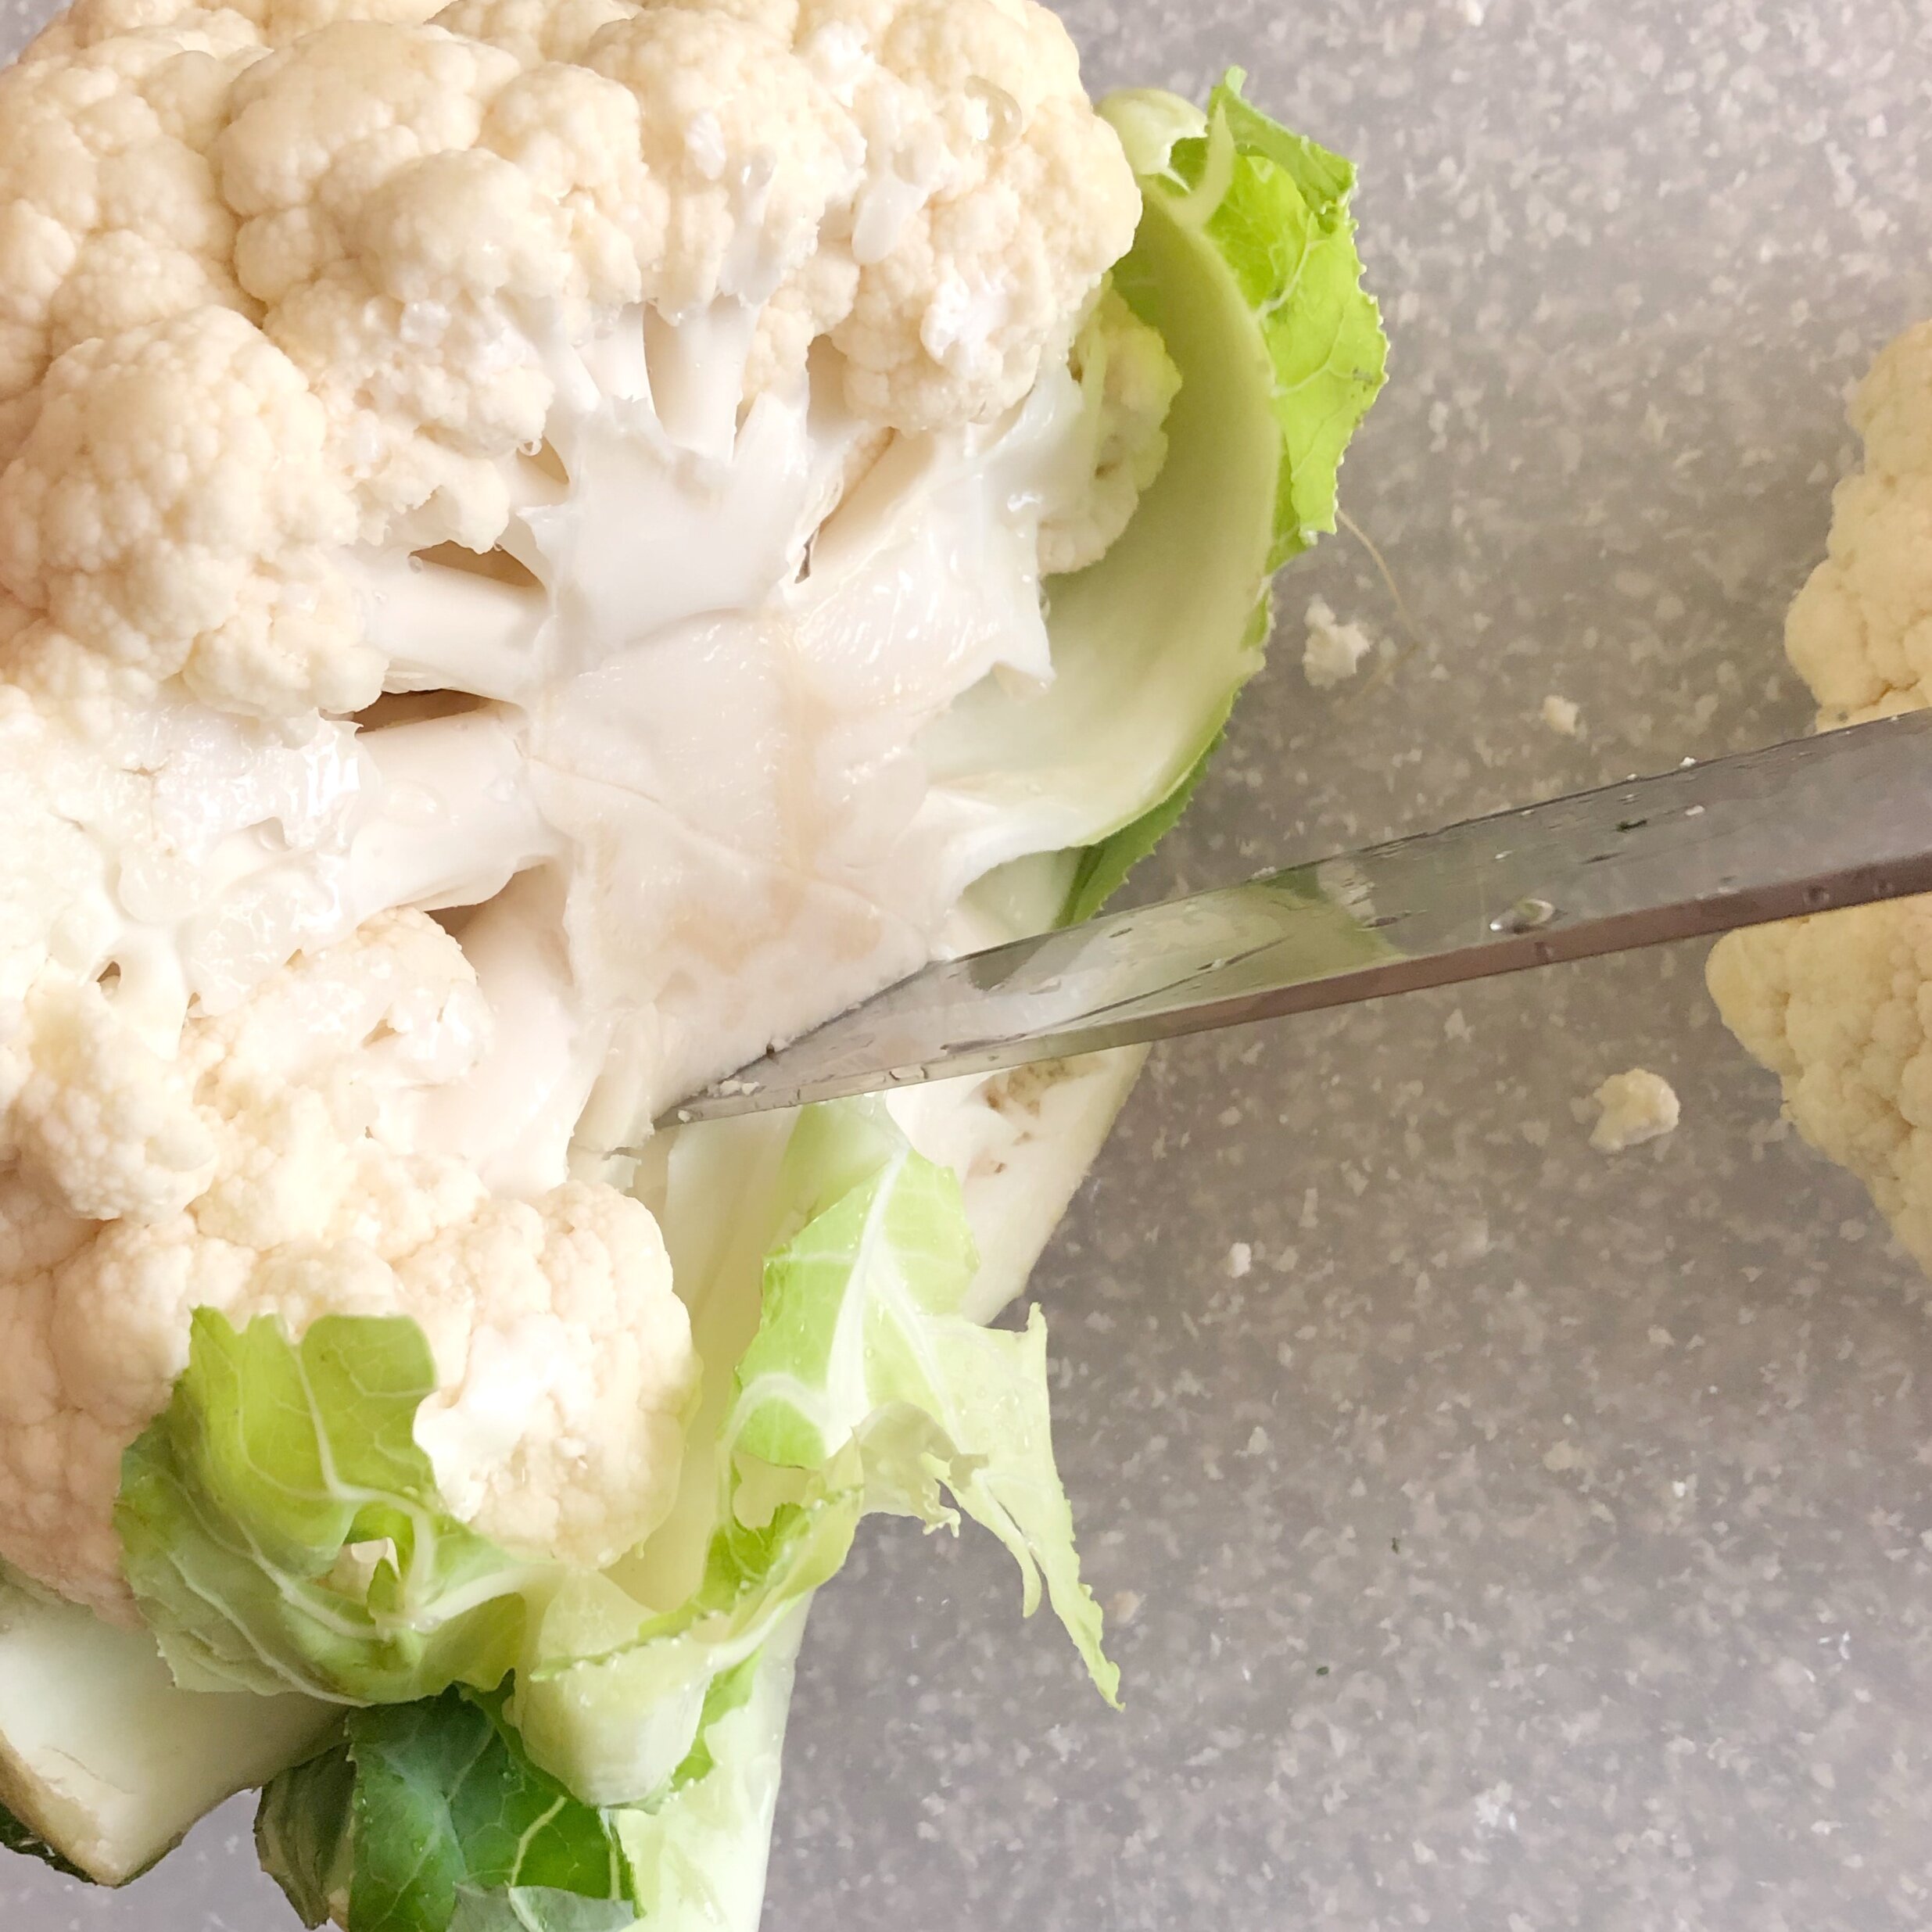 Remove the core of the cauliflower before boiling.